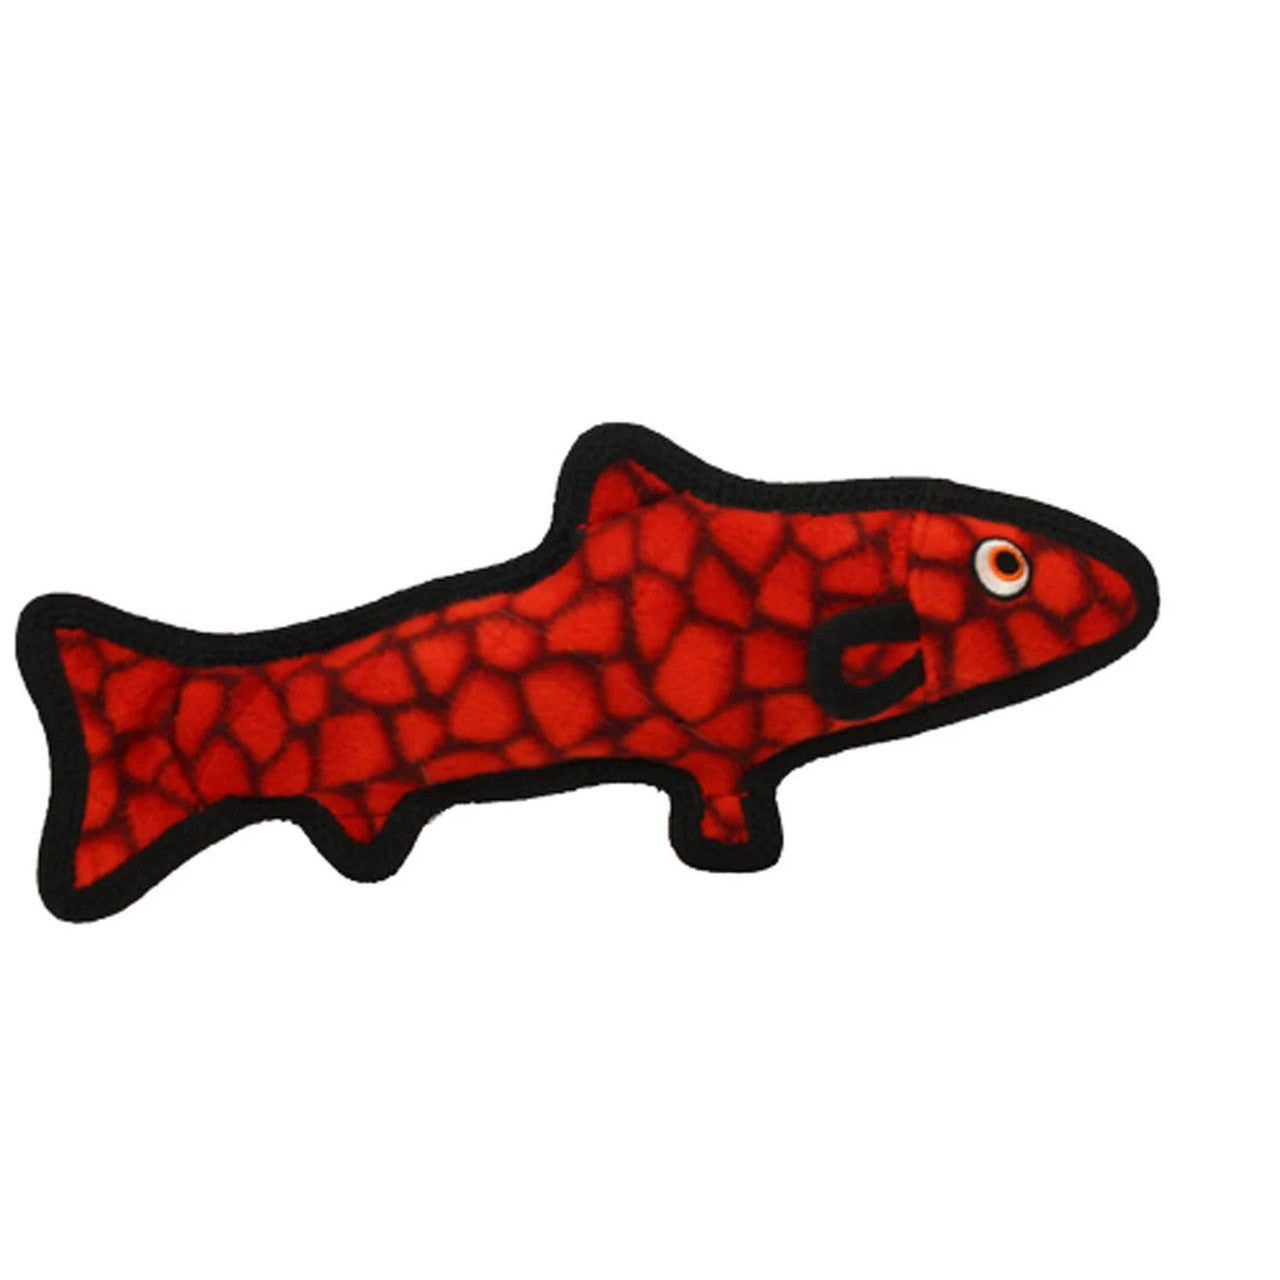 Tuffy Ocn Crtre Trout Red 180181908583